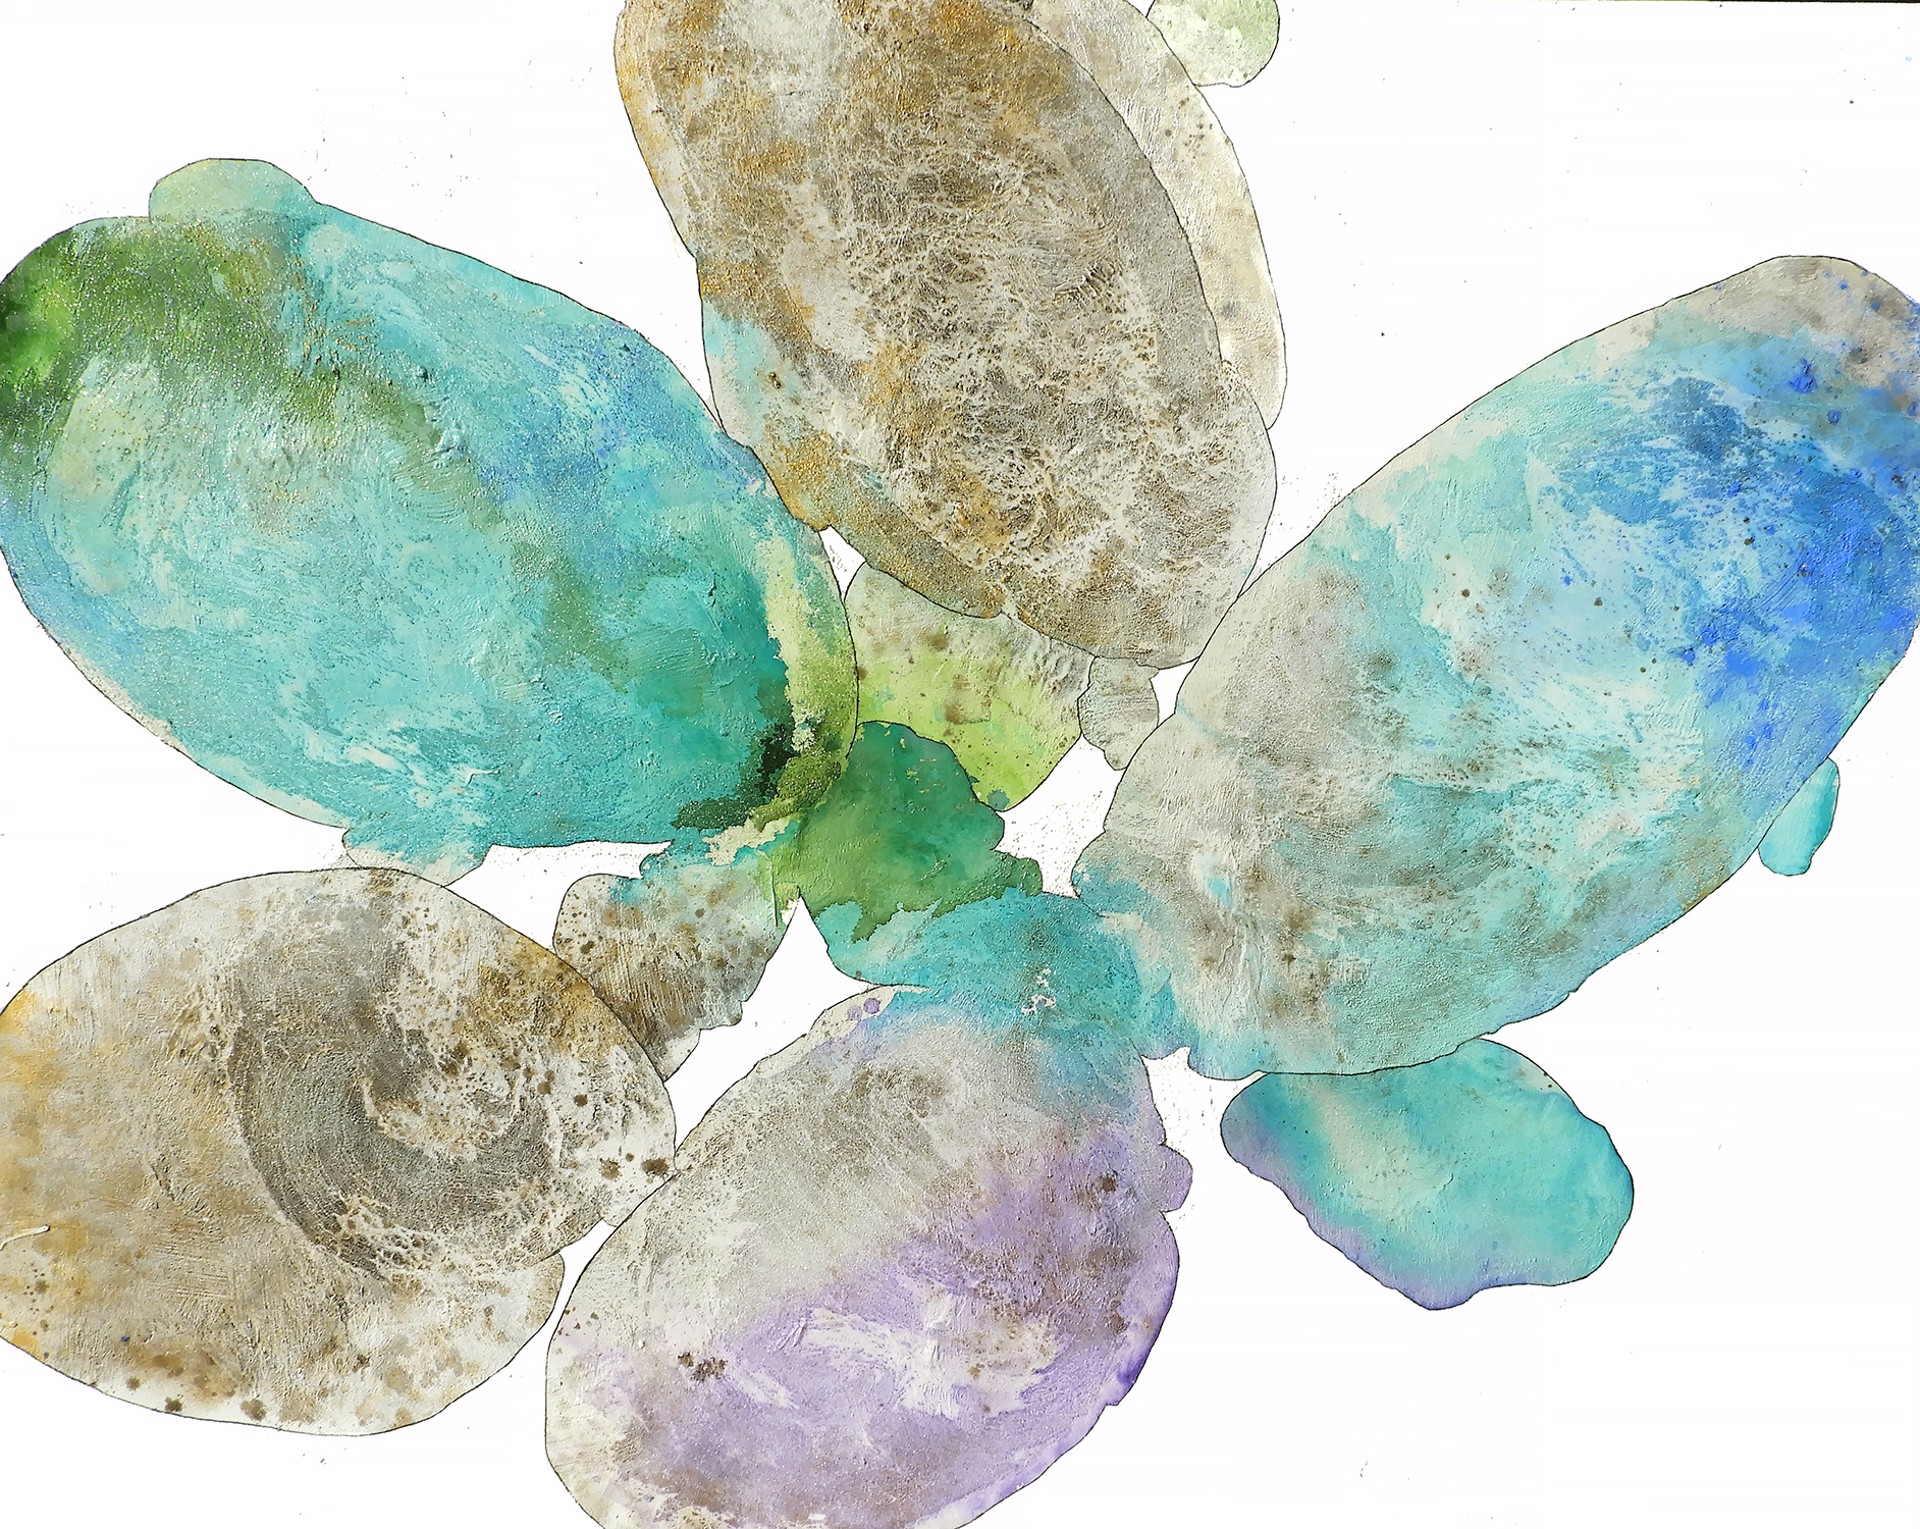 Sea Glass and Shallow Waters by Meredith Pardue